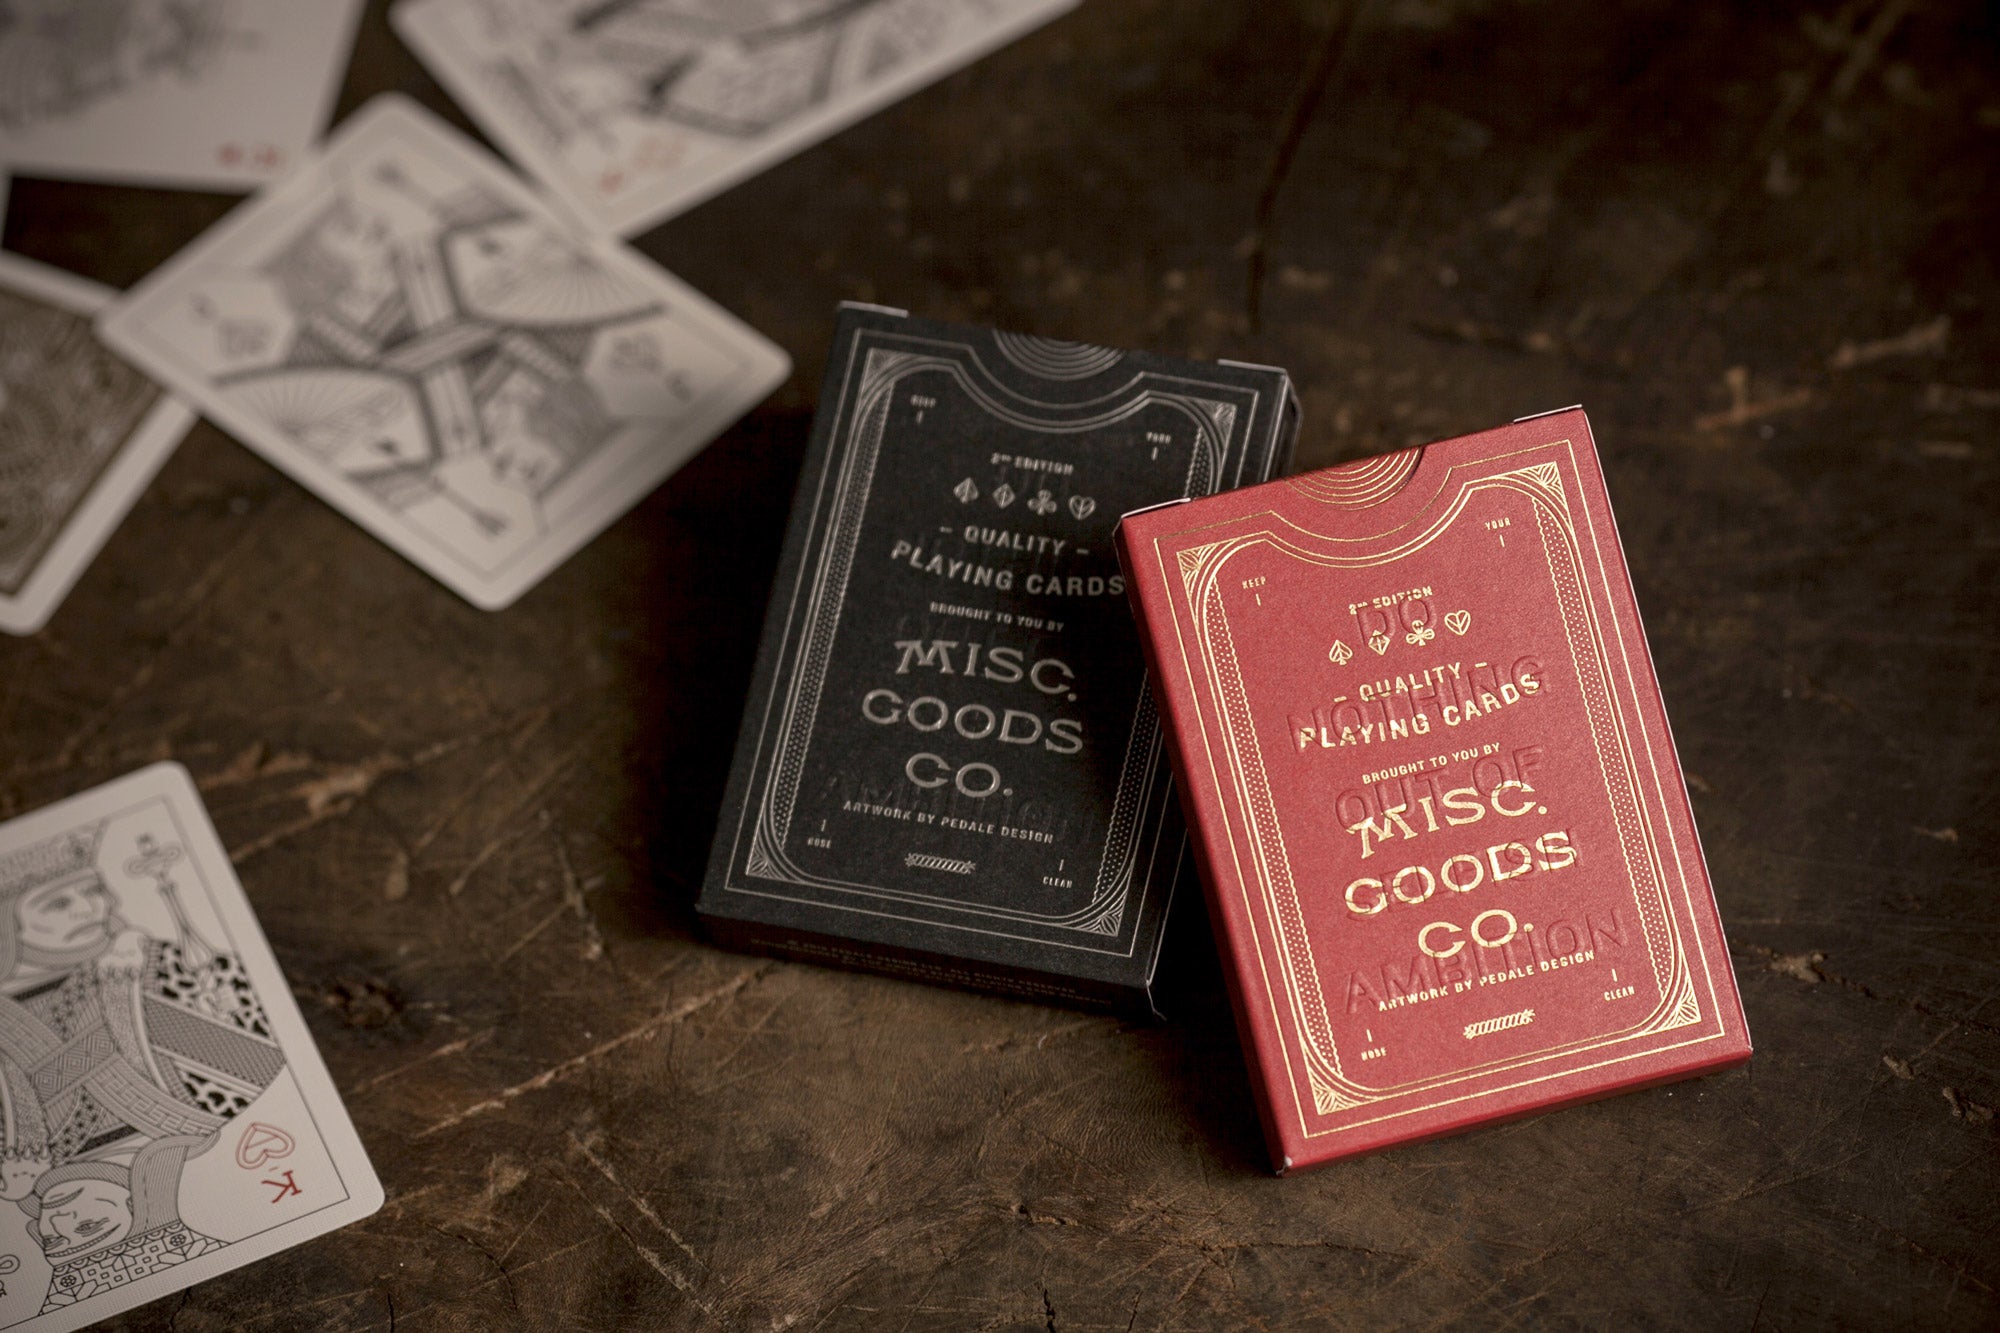 Misc. Goods Co. Luxury Playing Cards Proof of Concept Photo by Tyler Deeb